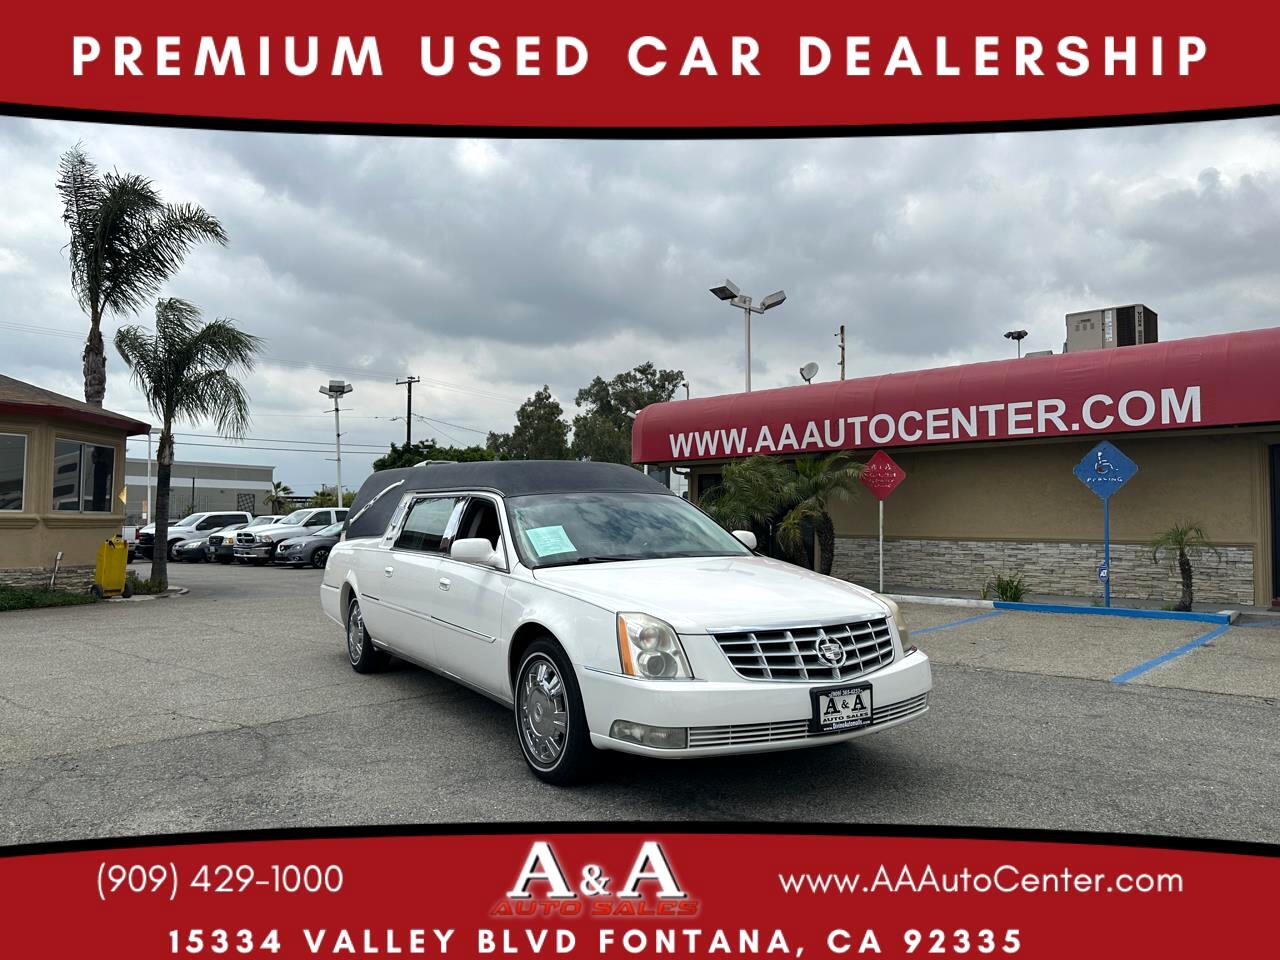 2011 Cadillac DTS Professional 4dr Sdn Funeral Coach